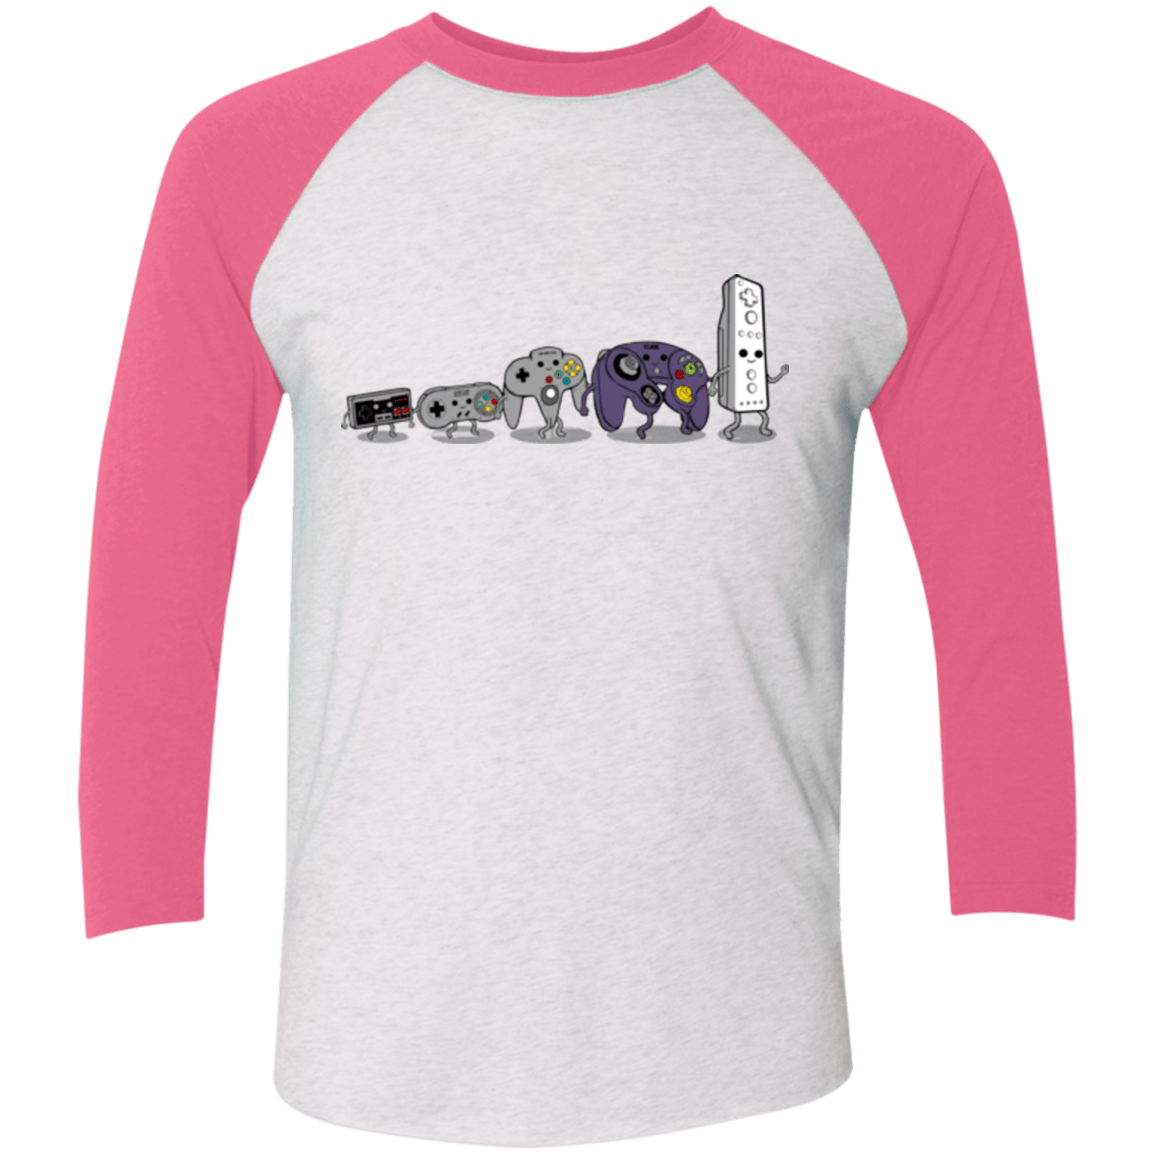 T-Shirts Heather White/Vintage Pink / X-Small Evolution controller NES Triblend 3/4 Sleeve